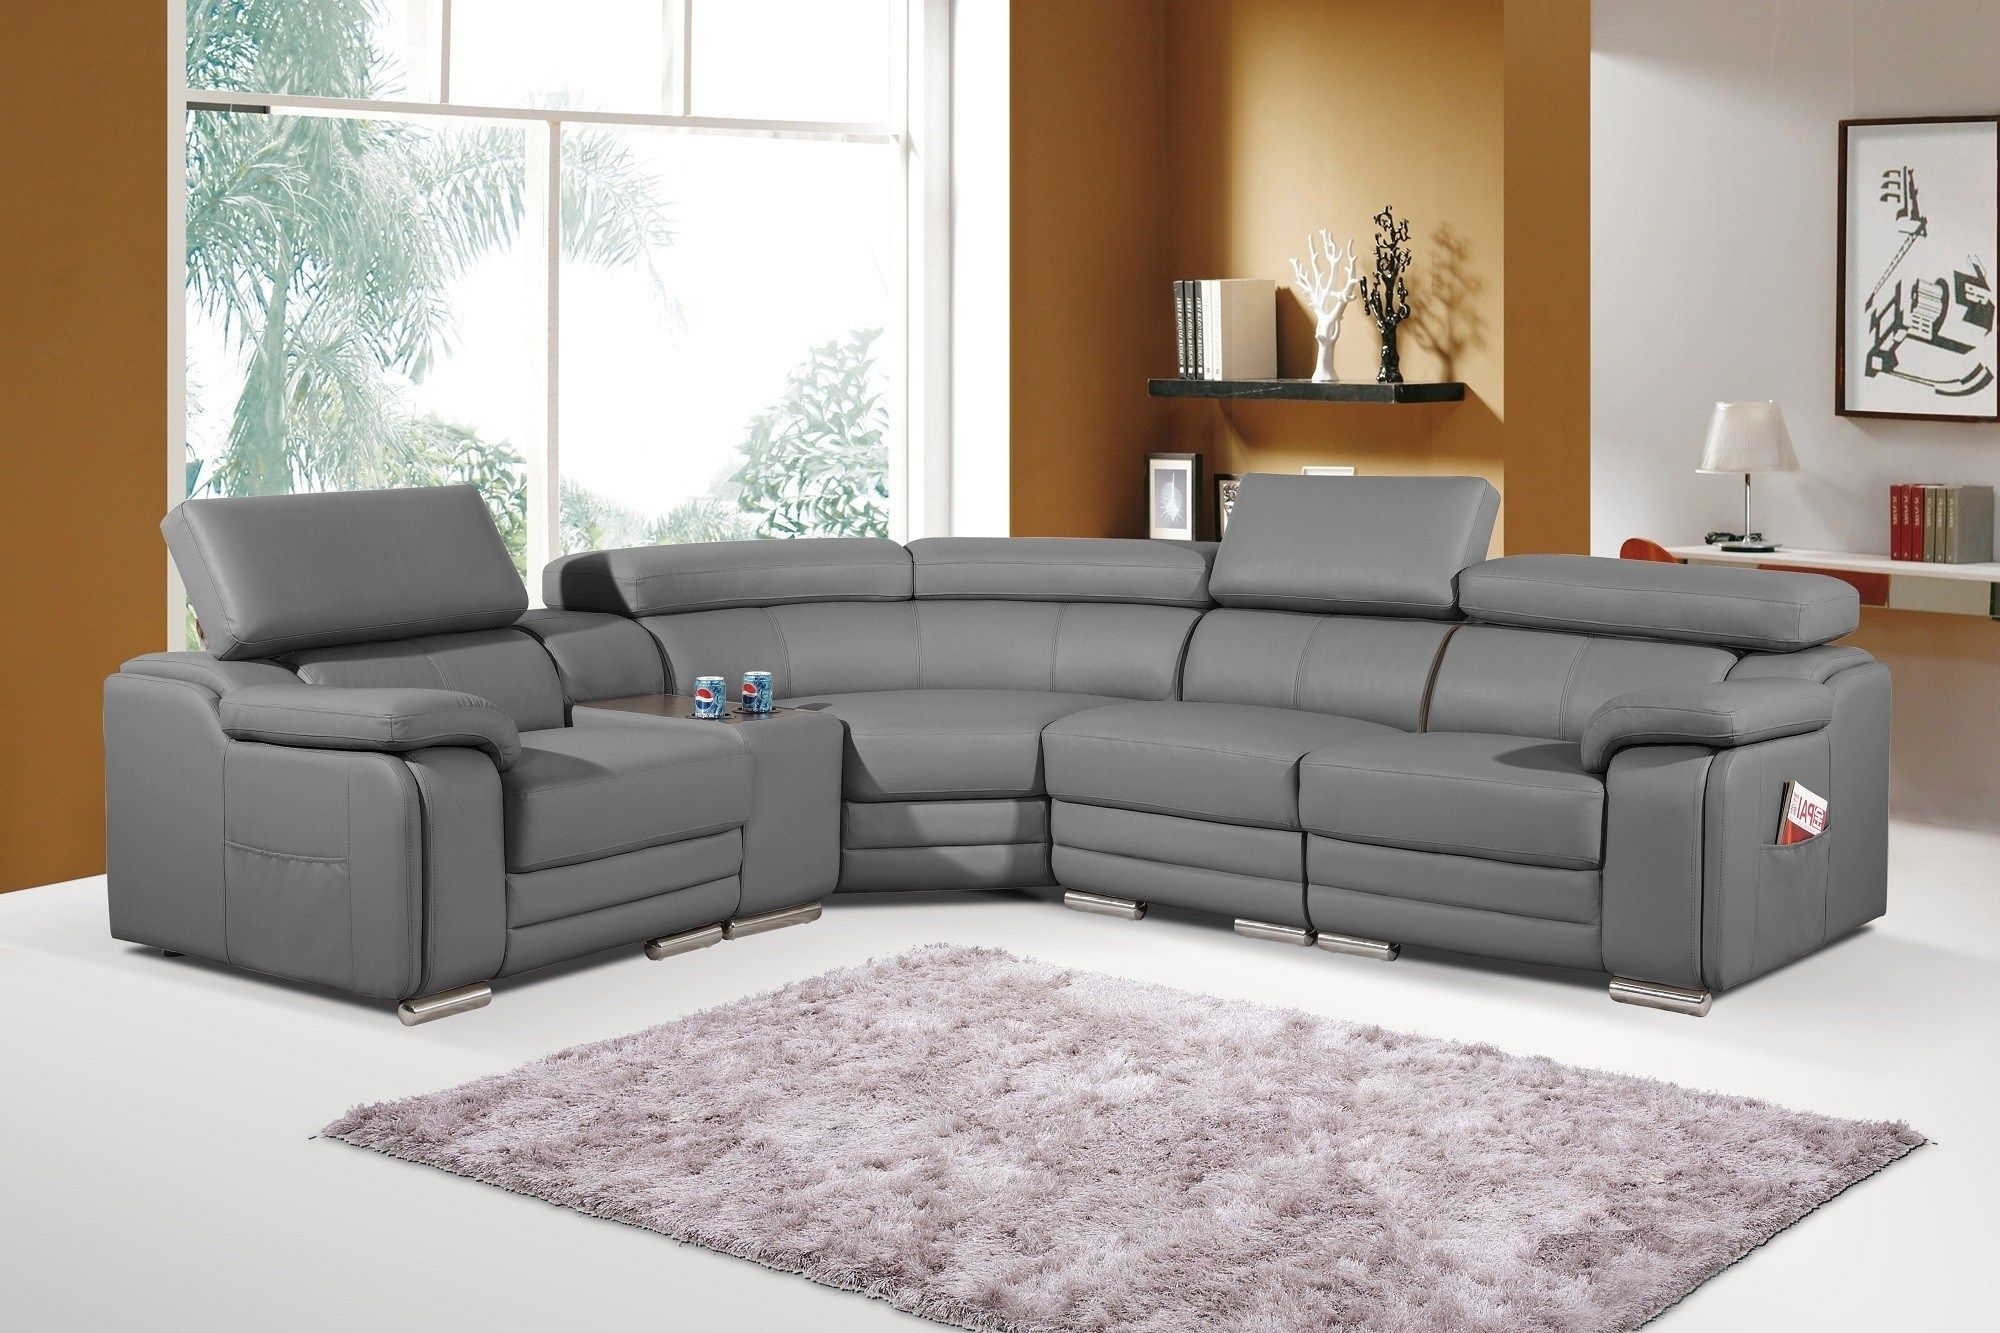 Astounding Target Sectional Sofa 74 In Sectional Sofas At Costco Pertaining To Target Sectional Sofas (Photo 4 of 10)